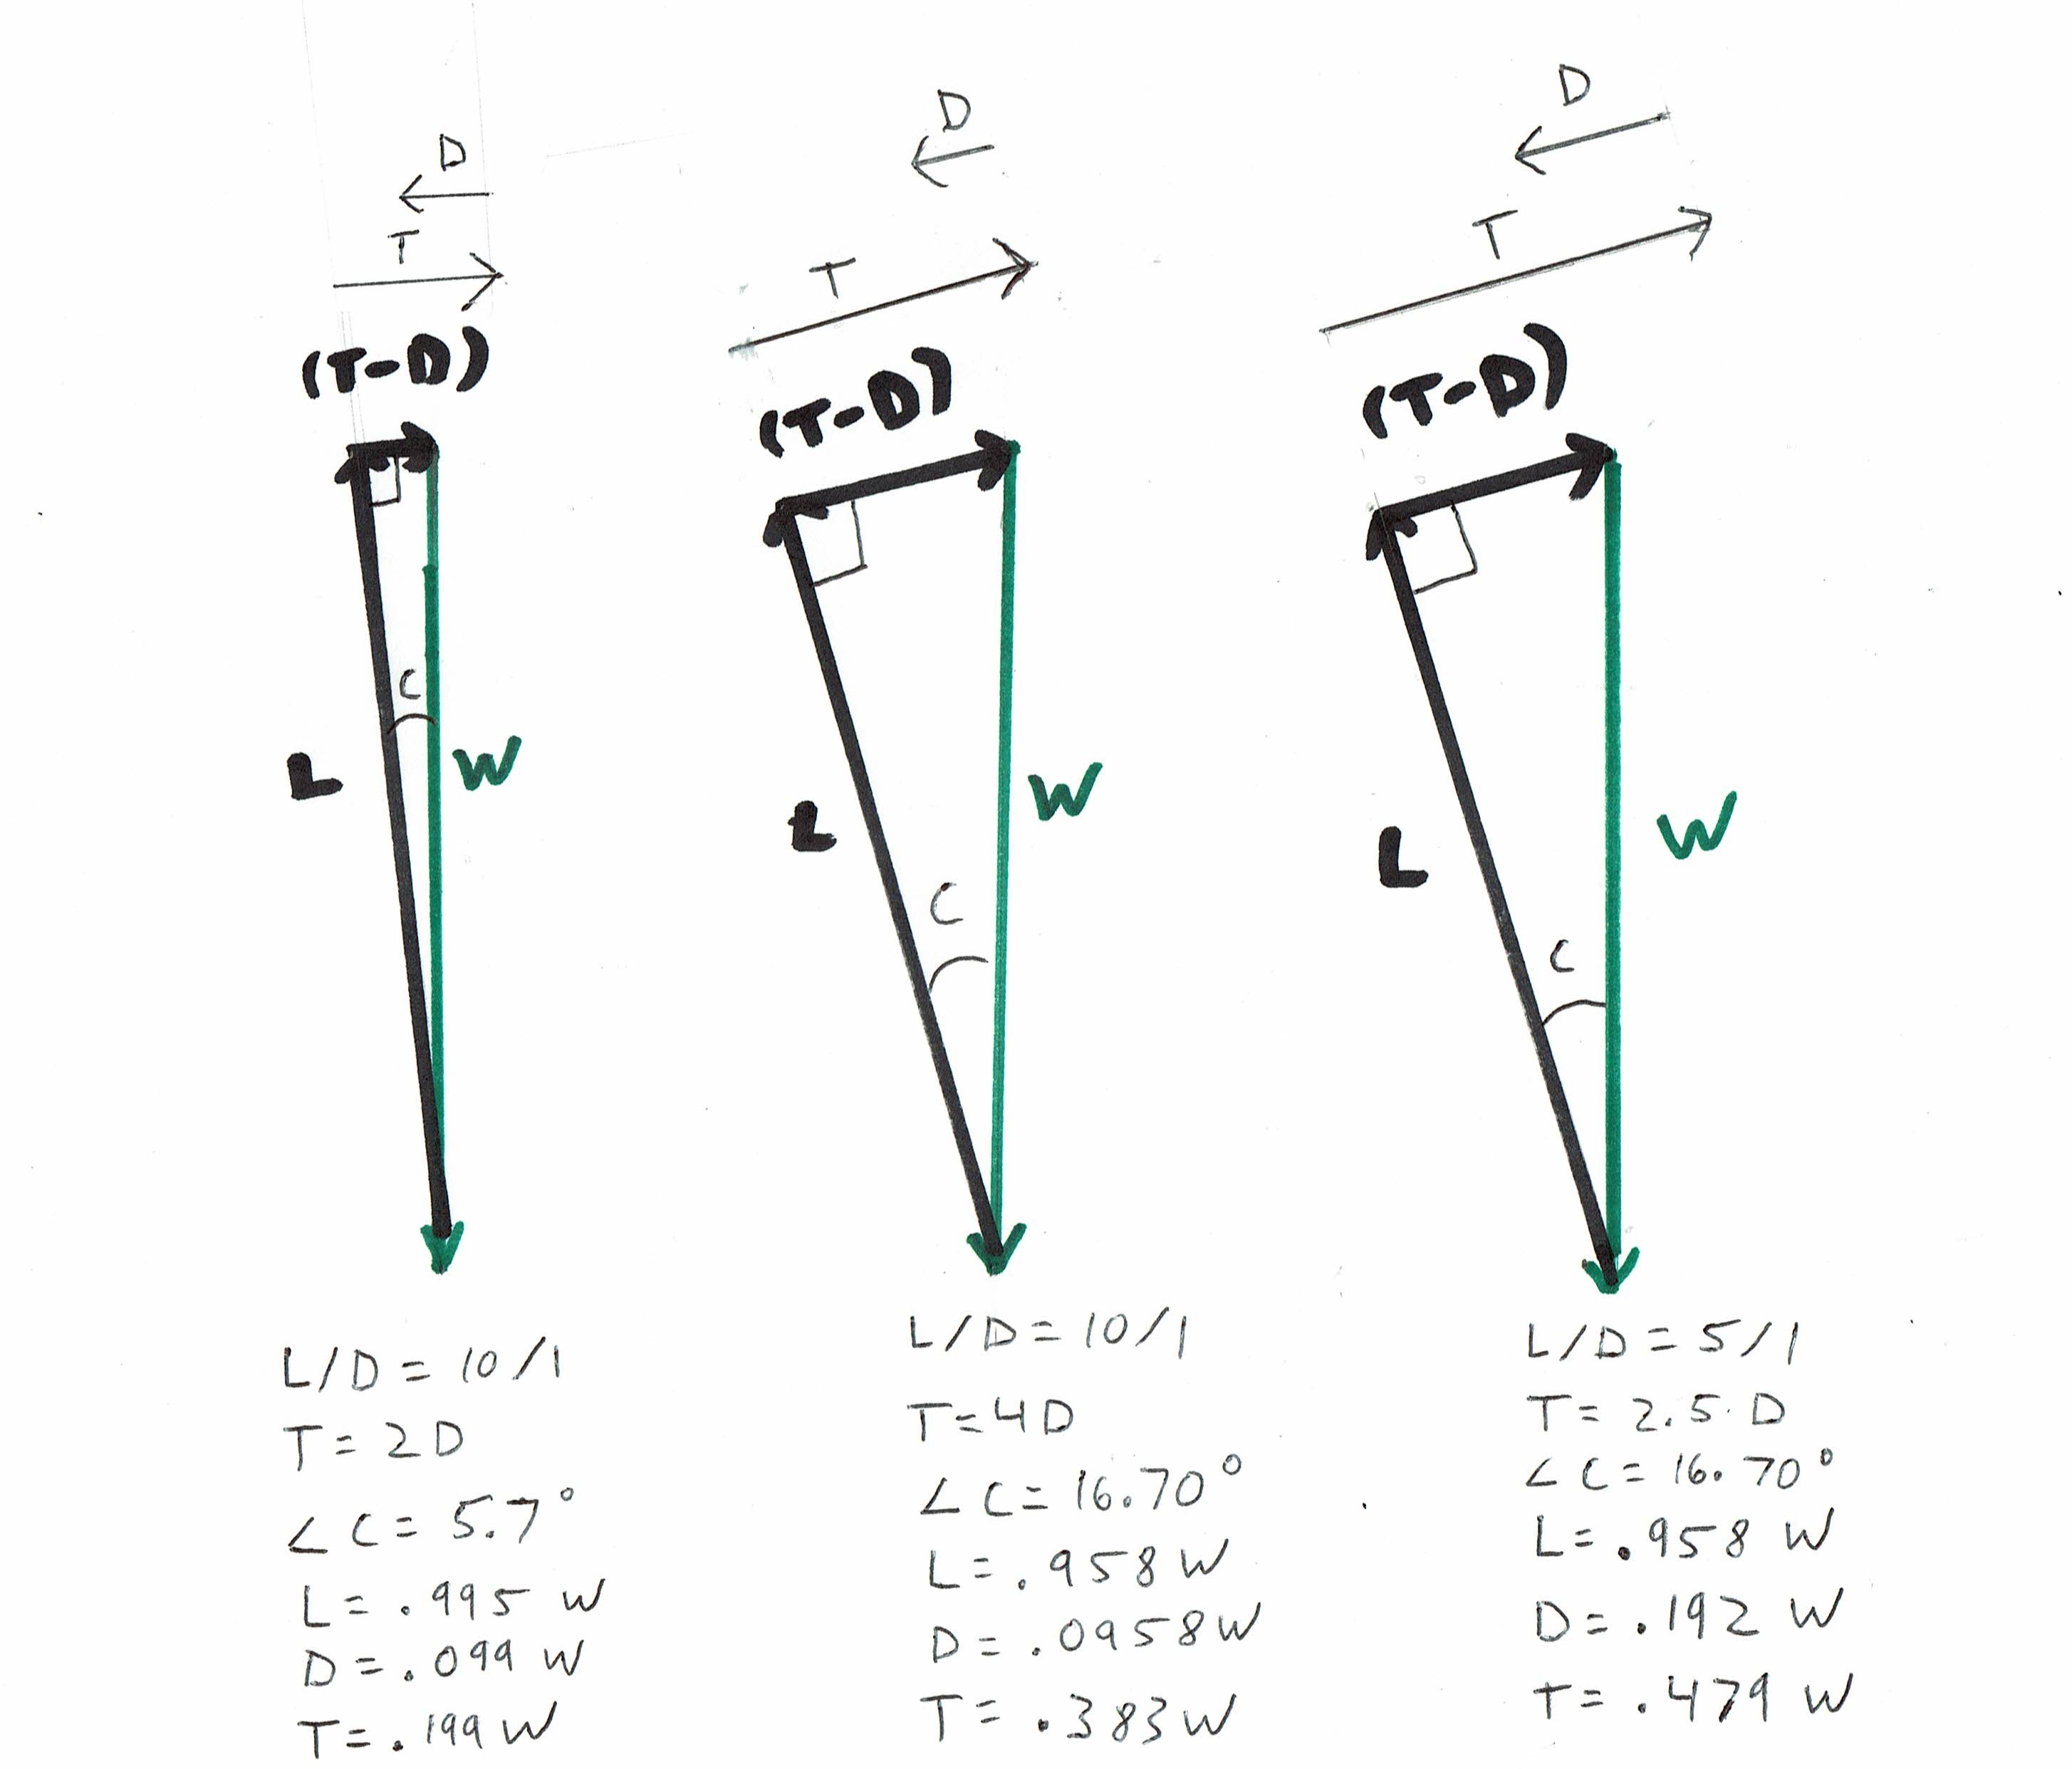 Varying the climb angle or the L/D ratio